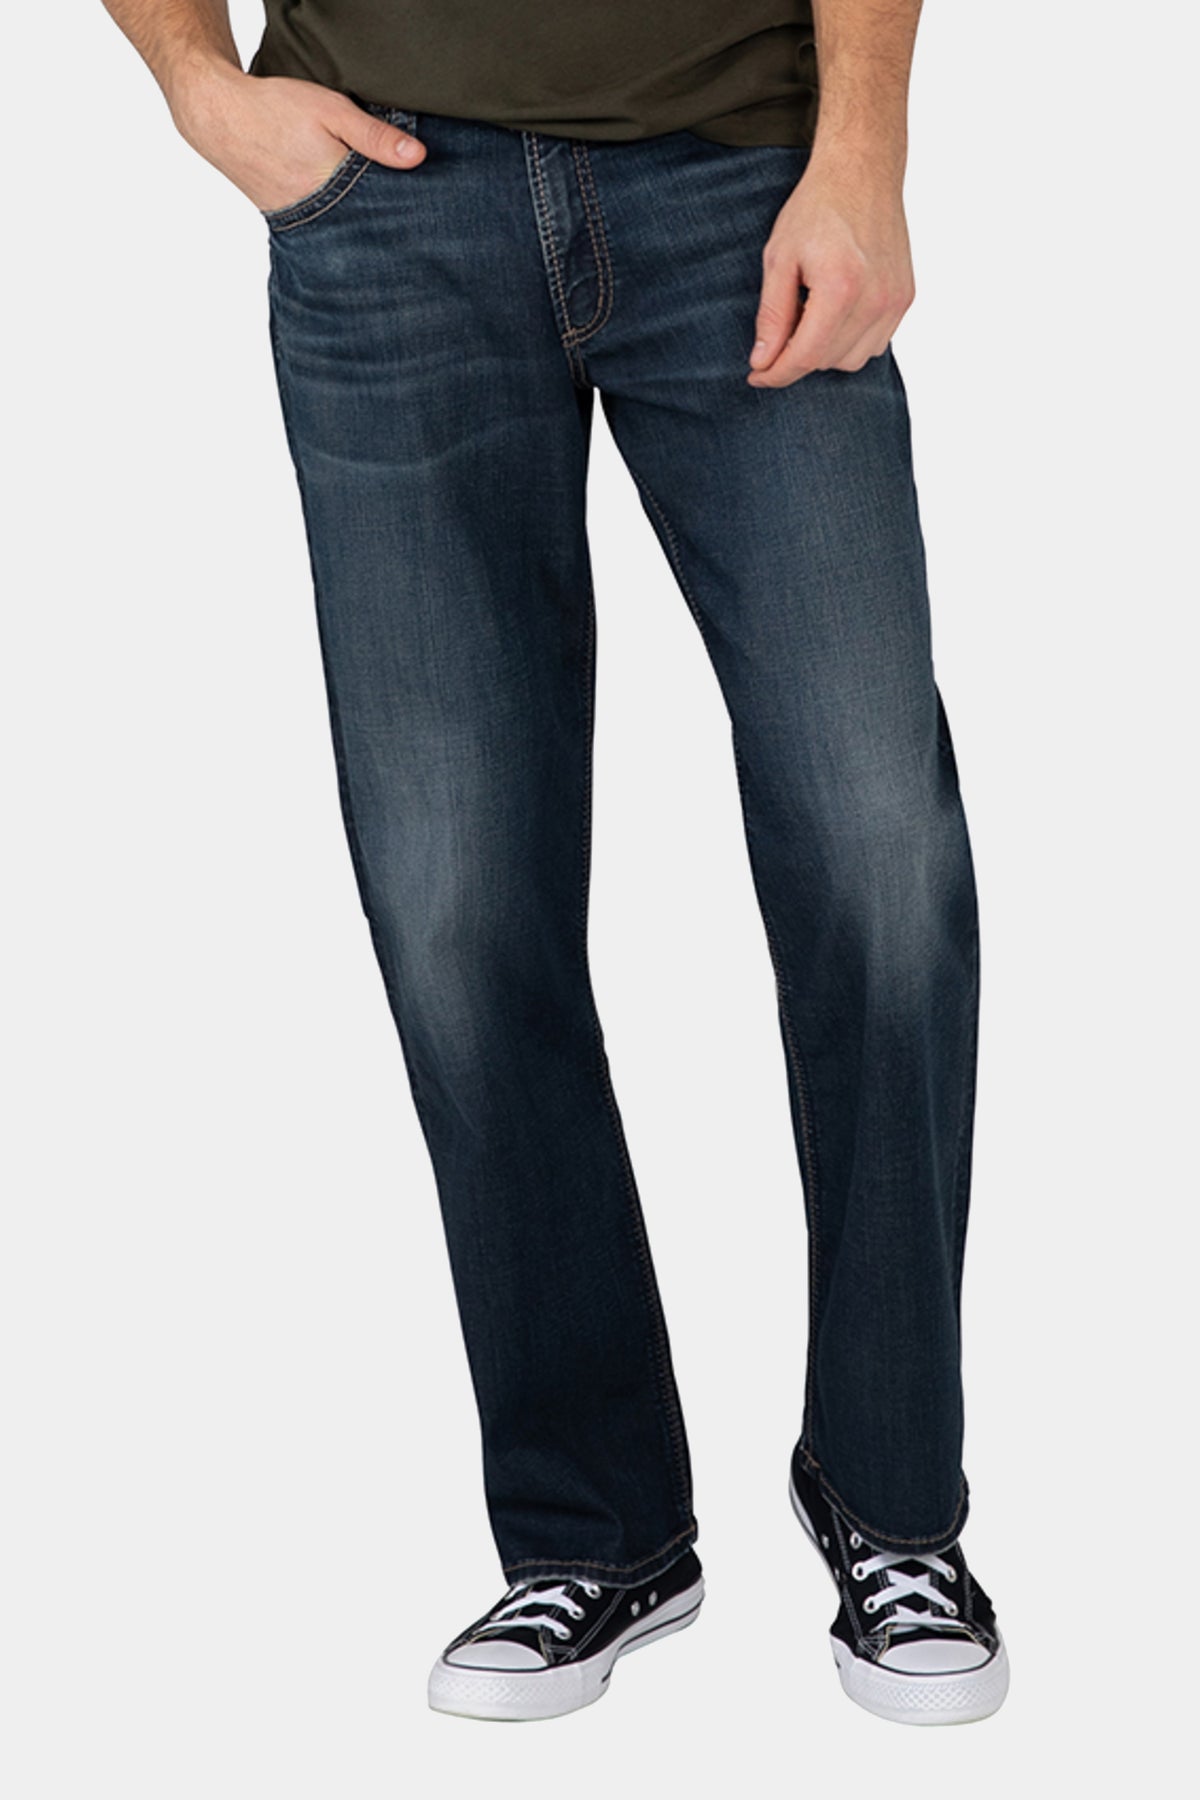 Silver Jeans Co. Men's Gordie Relaxed Fit Straight Leg Jeans, Light Wash  Indigo, 28W x 30L, Light Wash Indigo, 28W x 30L : : Clothing,  Shoes & Accessories